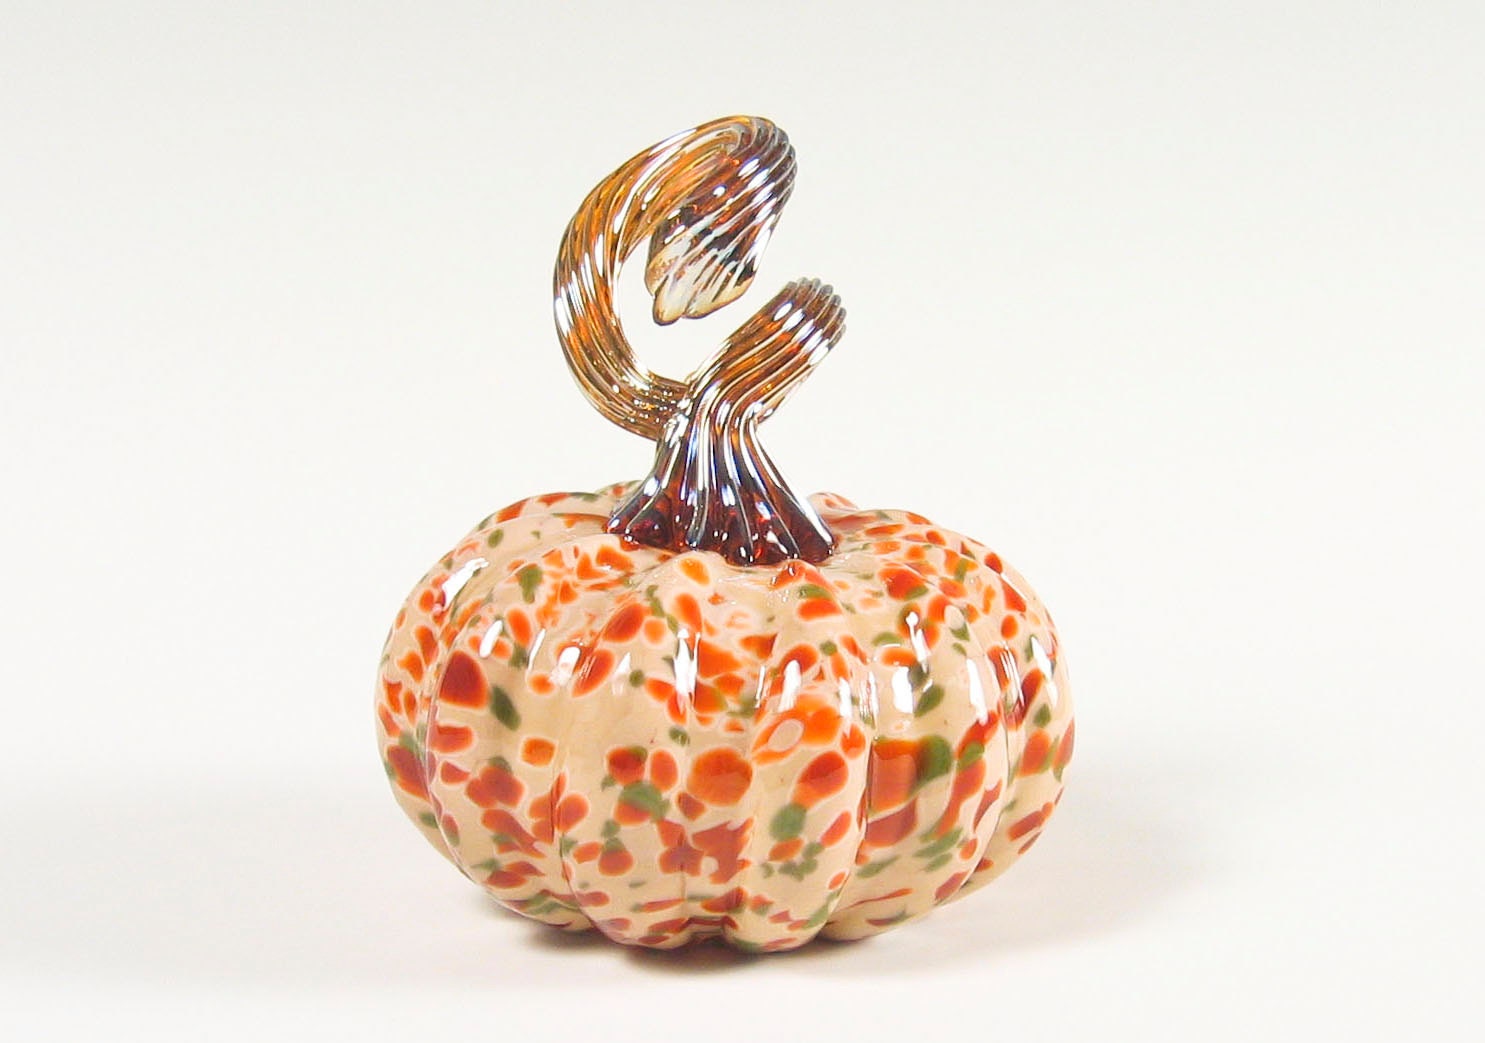 Hand Blown Glass Pumpkin Holiday Home Decor by AvolieGlass on Etsy